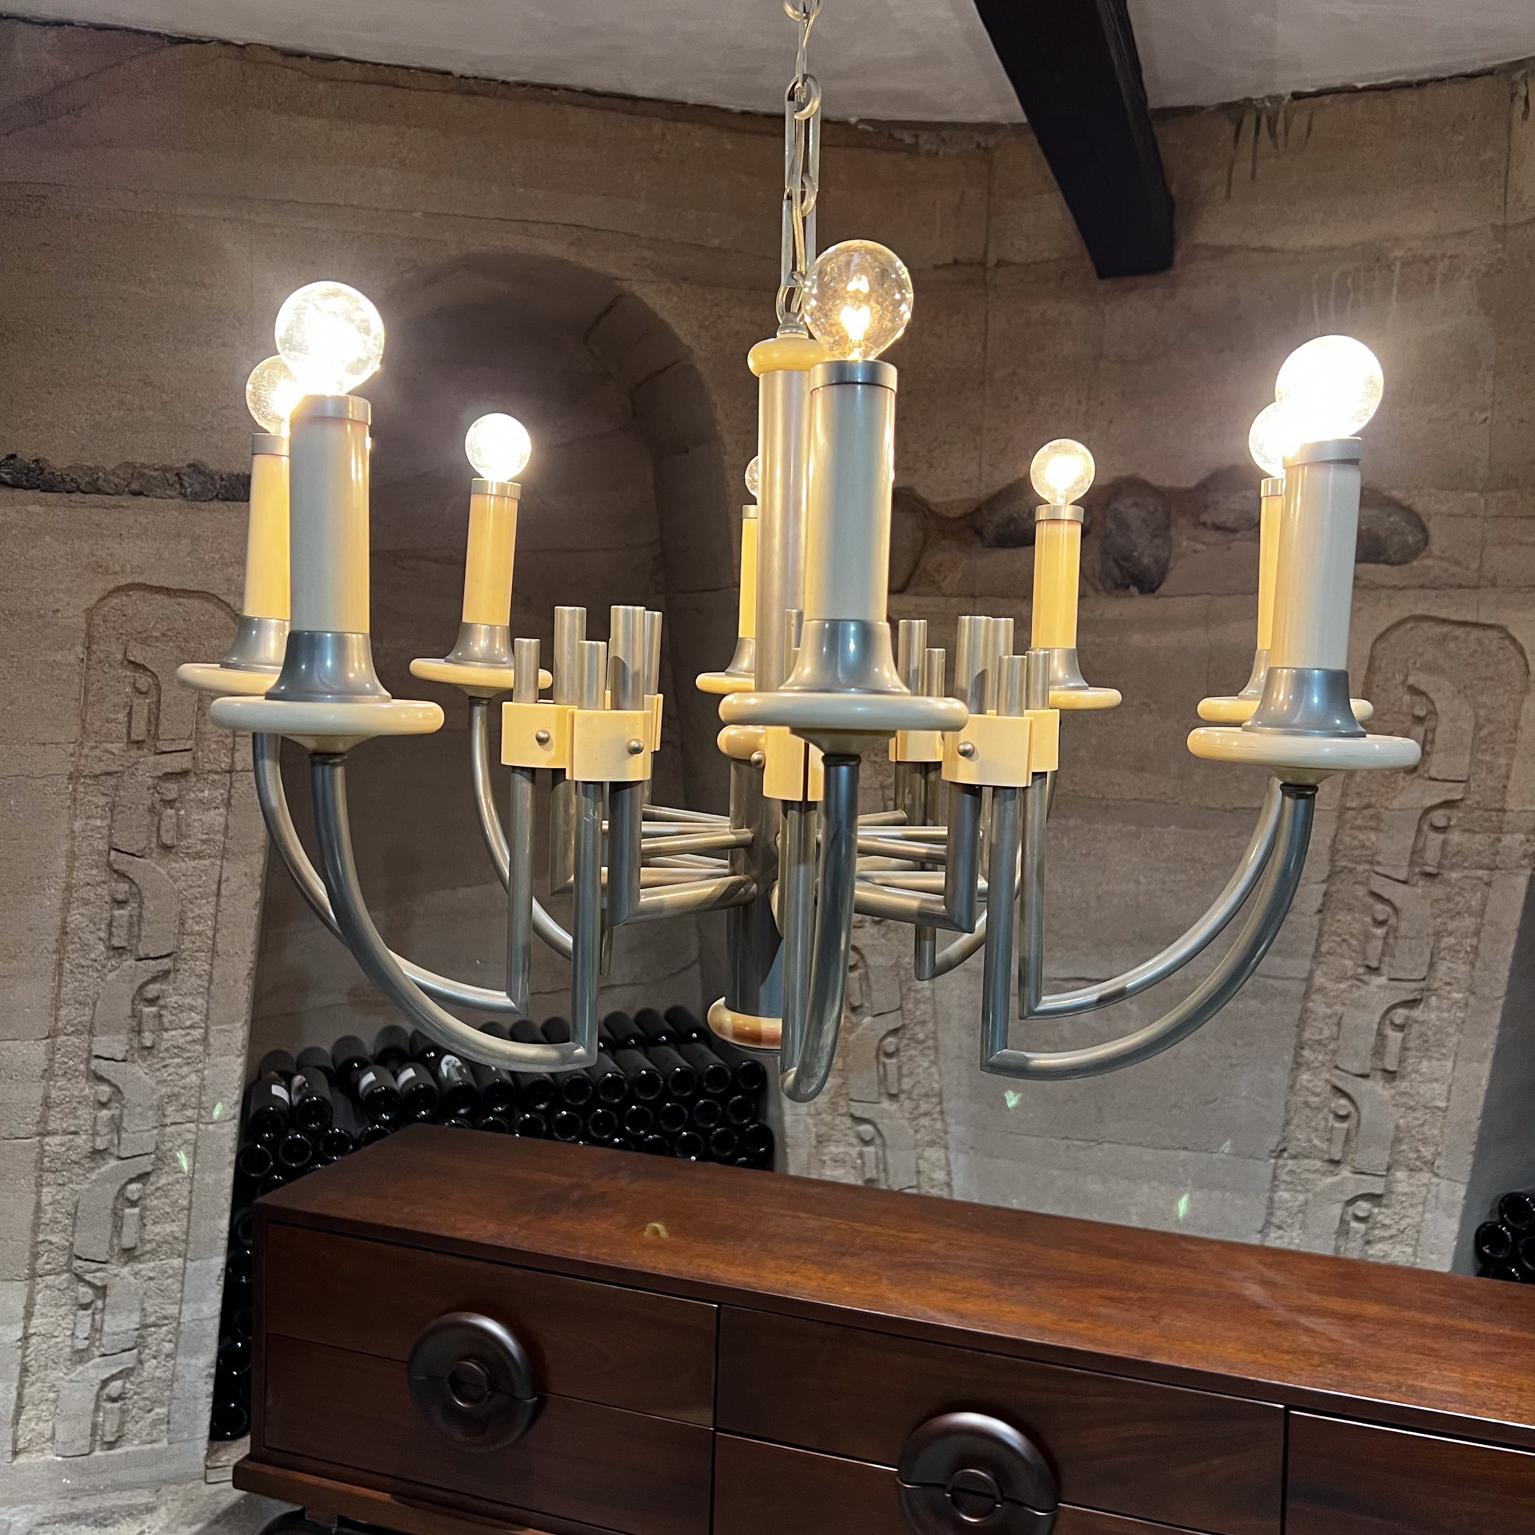 1940s Art Deco Eight Arm Chandelier Bakelite and Chrome
White Bakelite on Chrome-plated Tubular Steel.
34 tall x 31 inches diameter.
Timeless elegant design acquired estate of David Becke,r Bel Air, California
Features eight (8) bulbs on top one